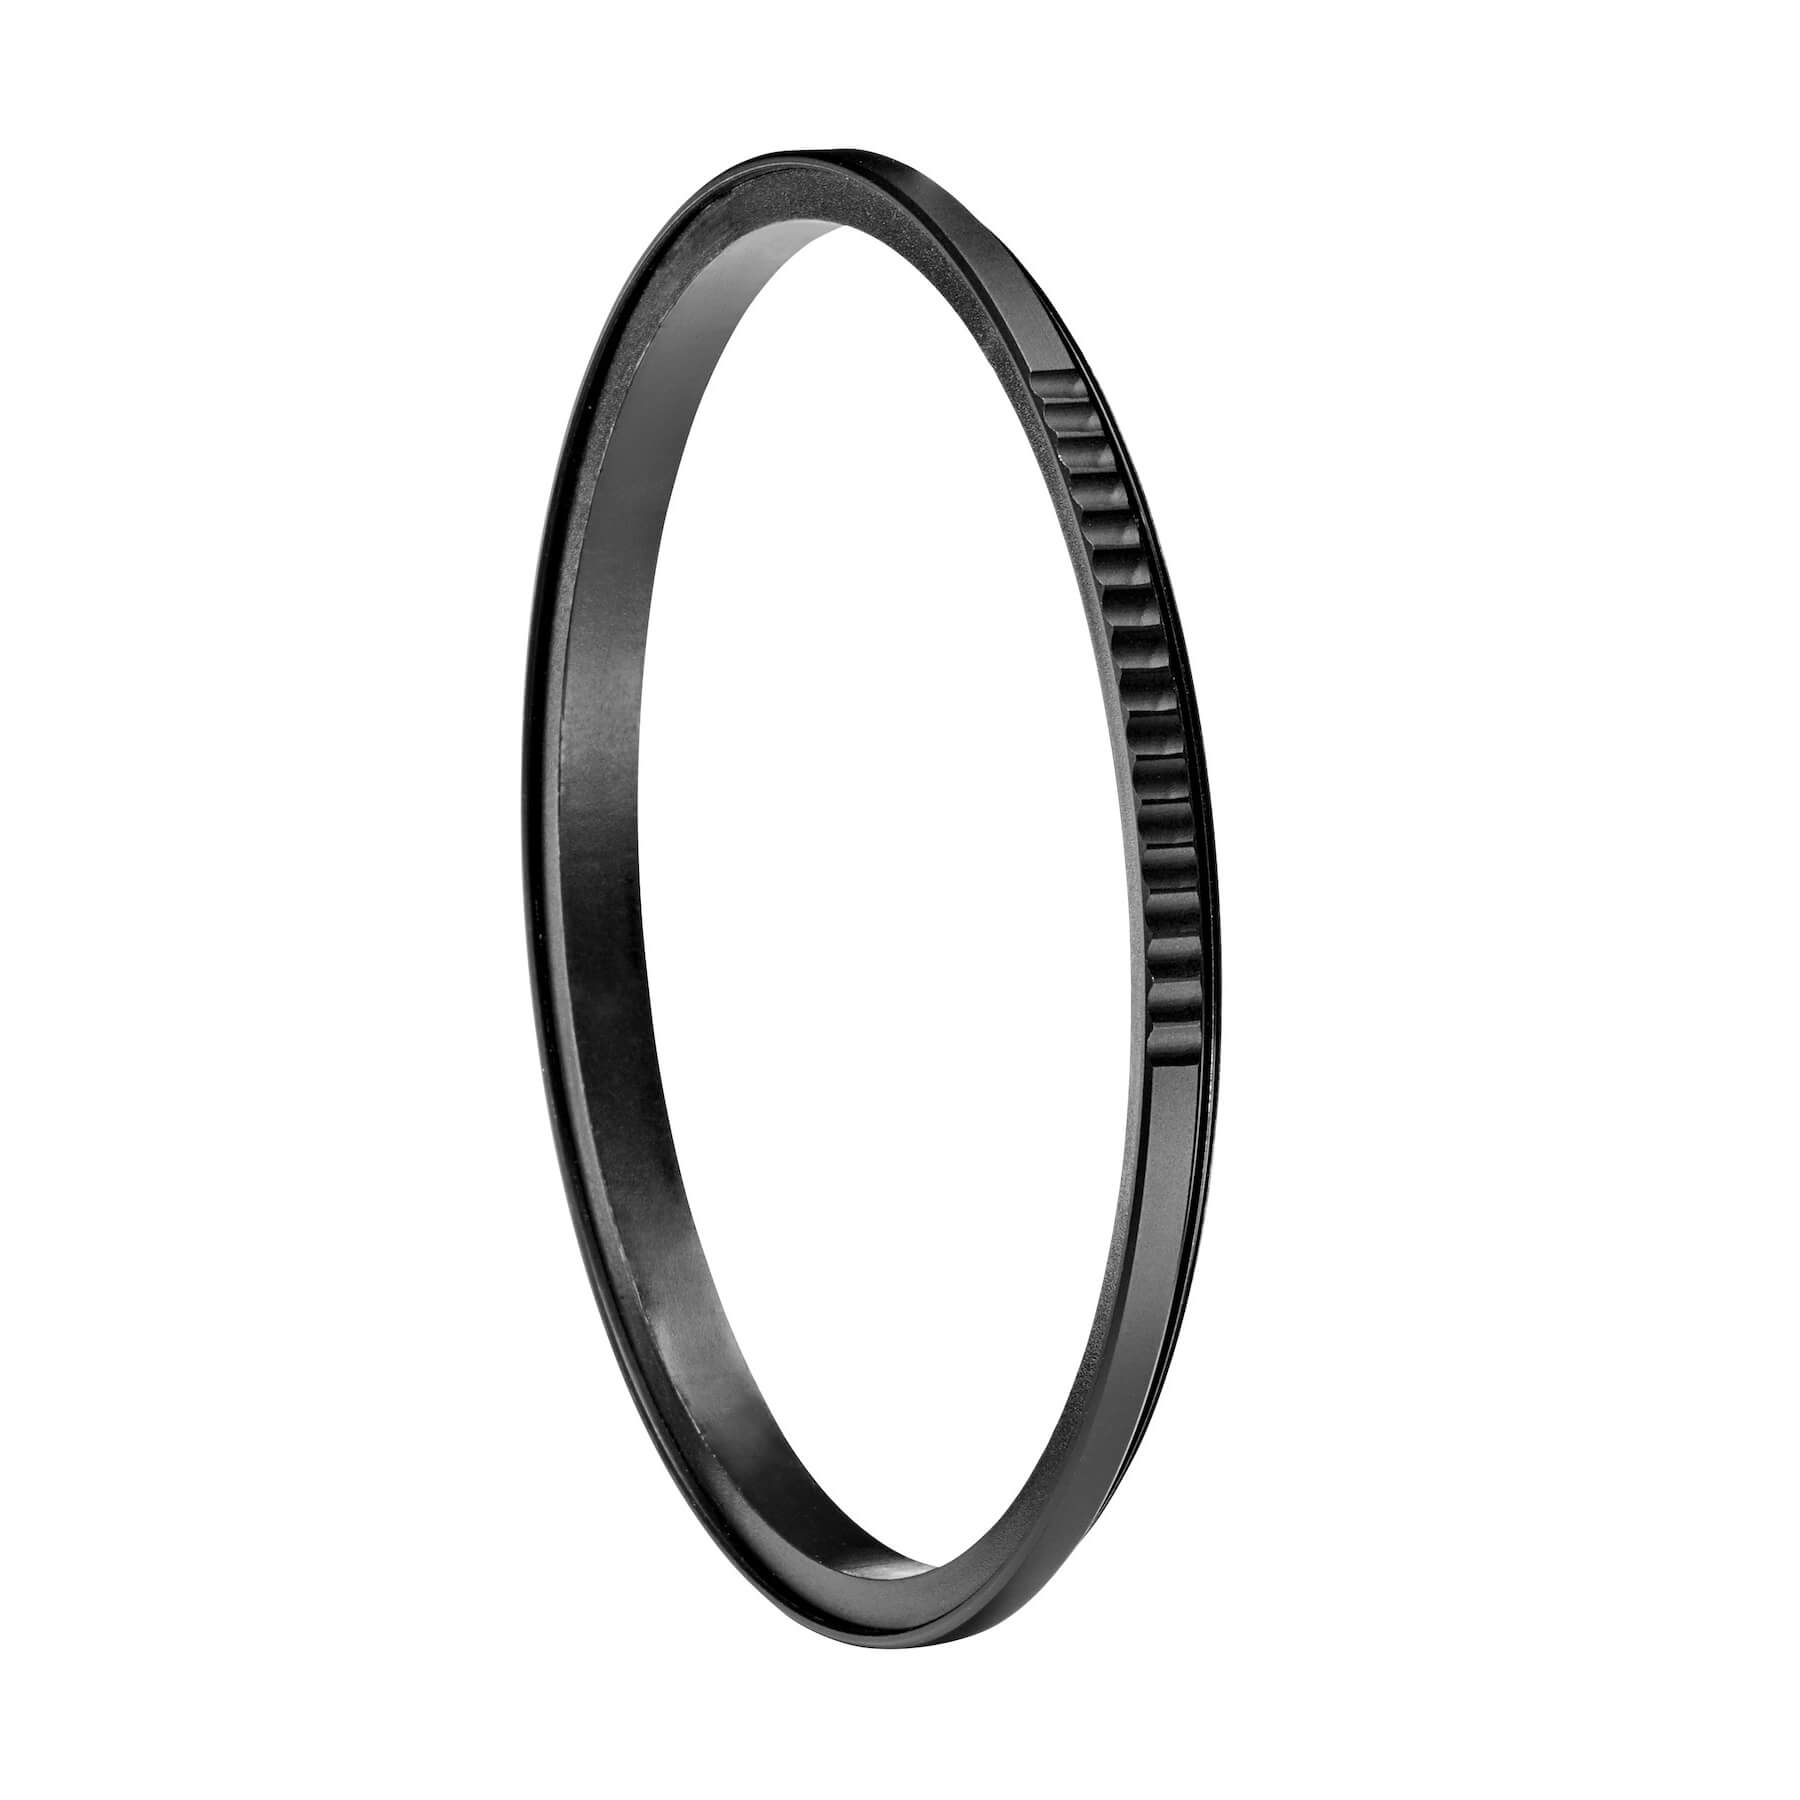 MANFROTTO Lens Adapter XUME 46 mm